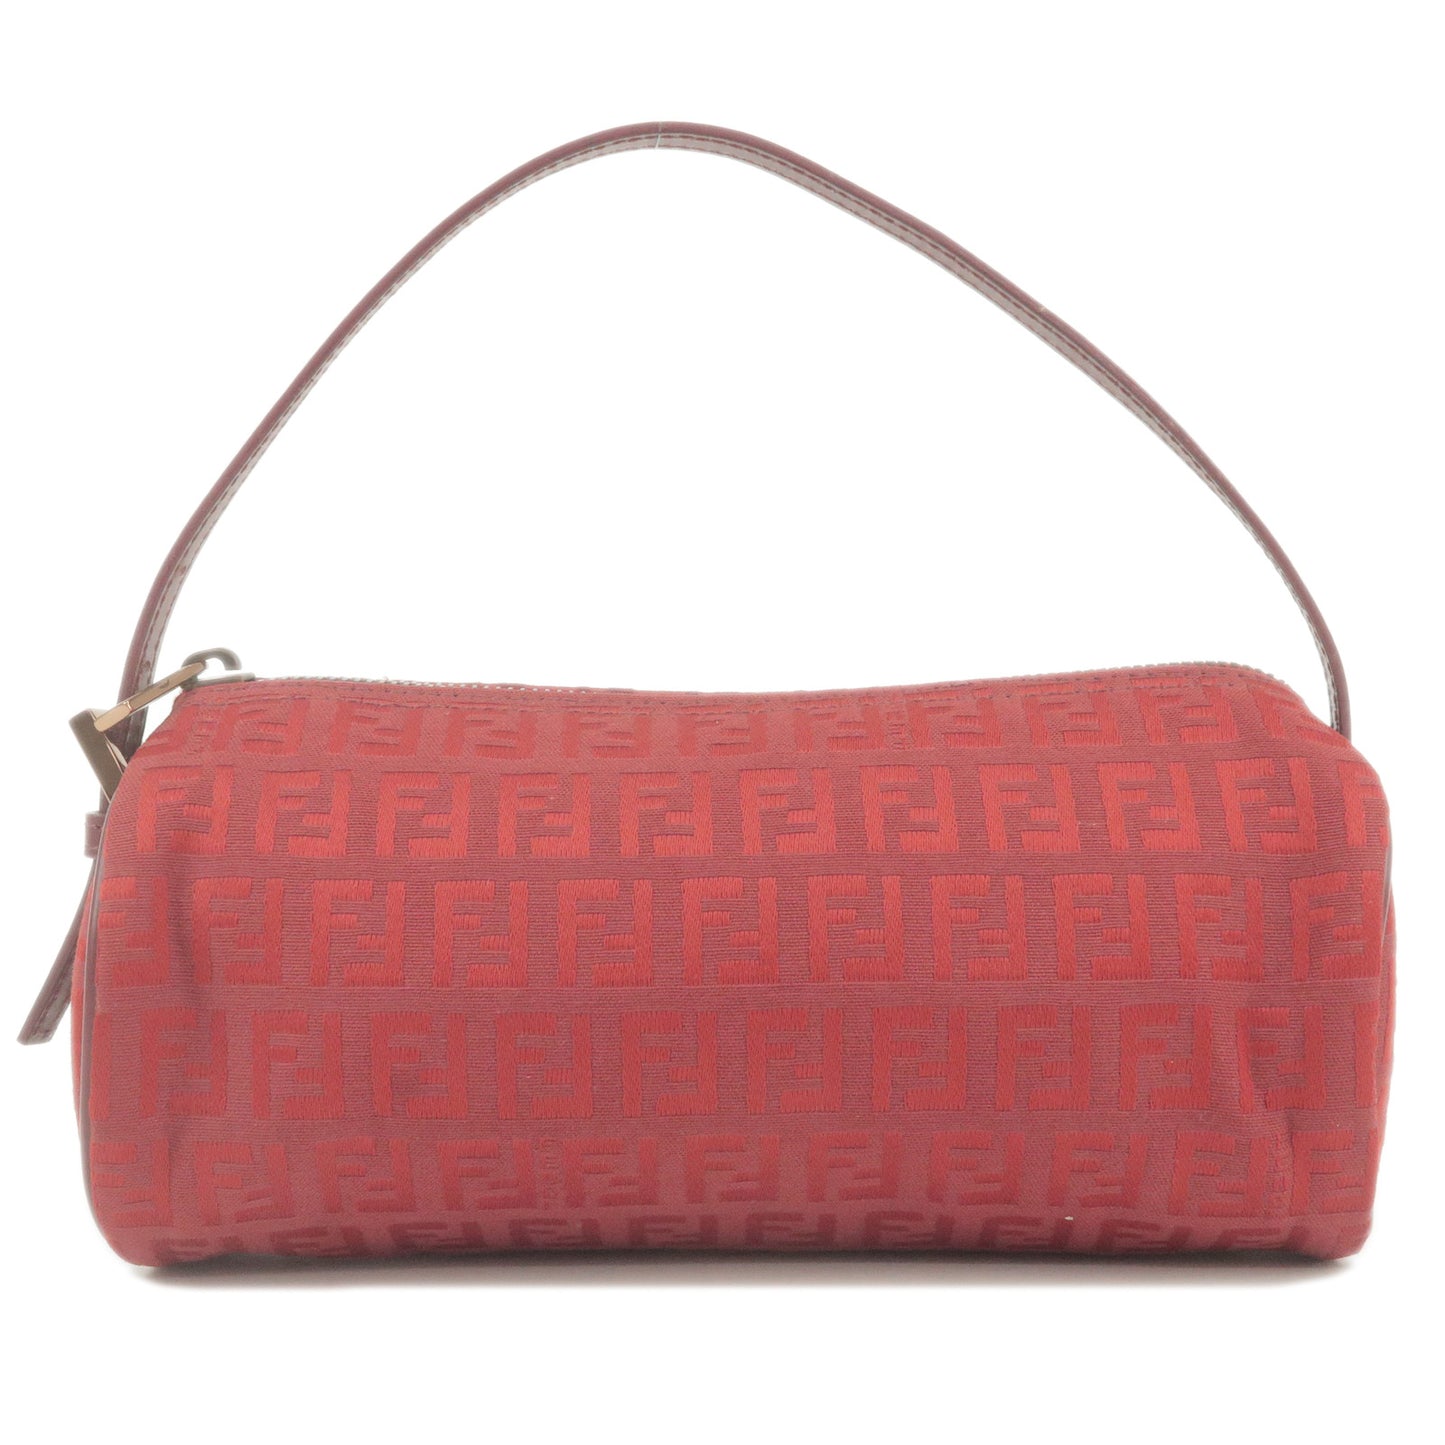 FENDI-Zucchino-Canvas-Leather-Hand-Bag-Pouch-Red-7N0016